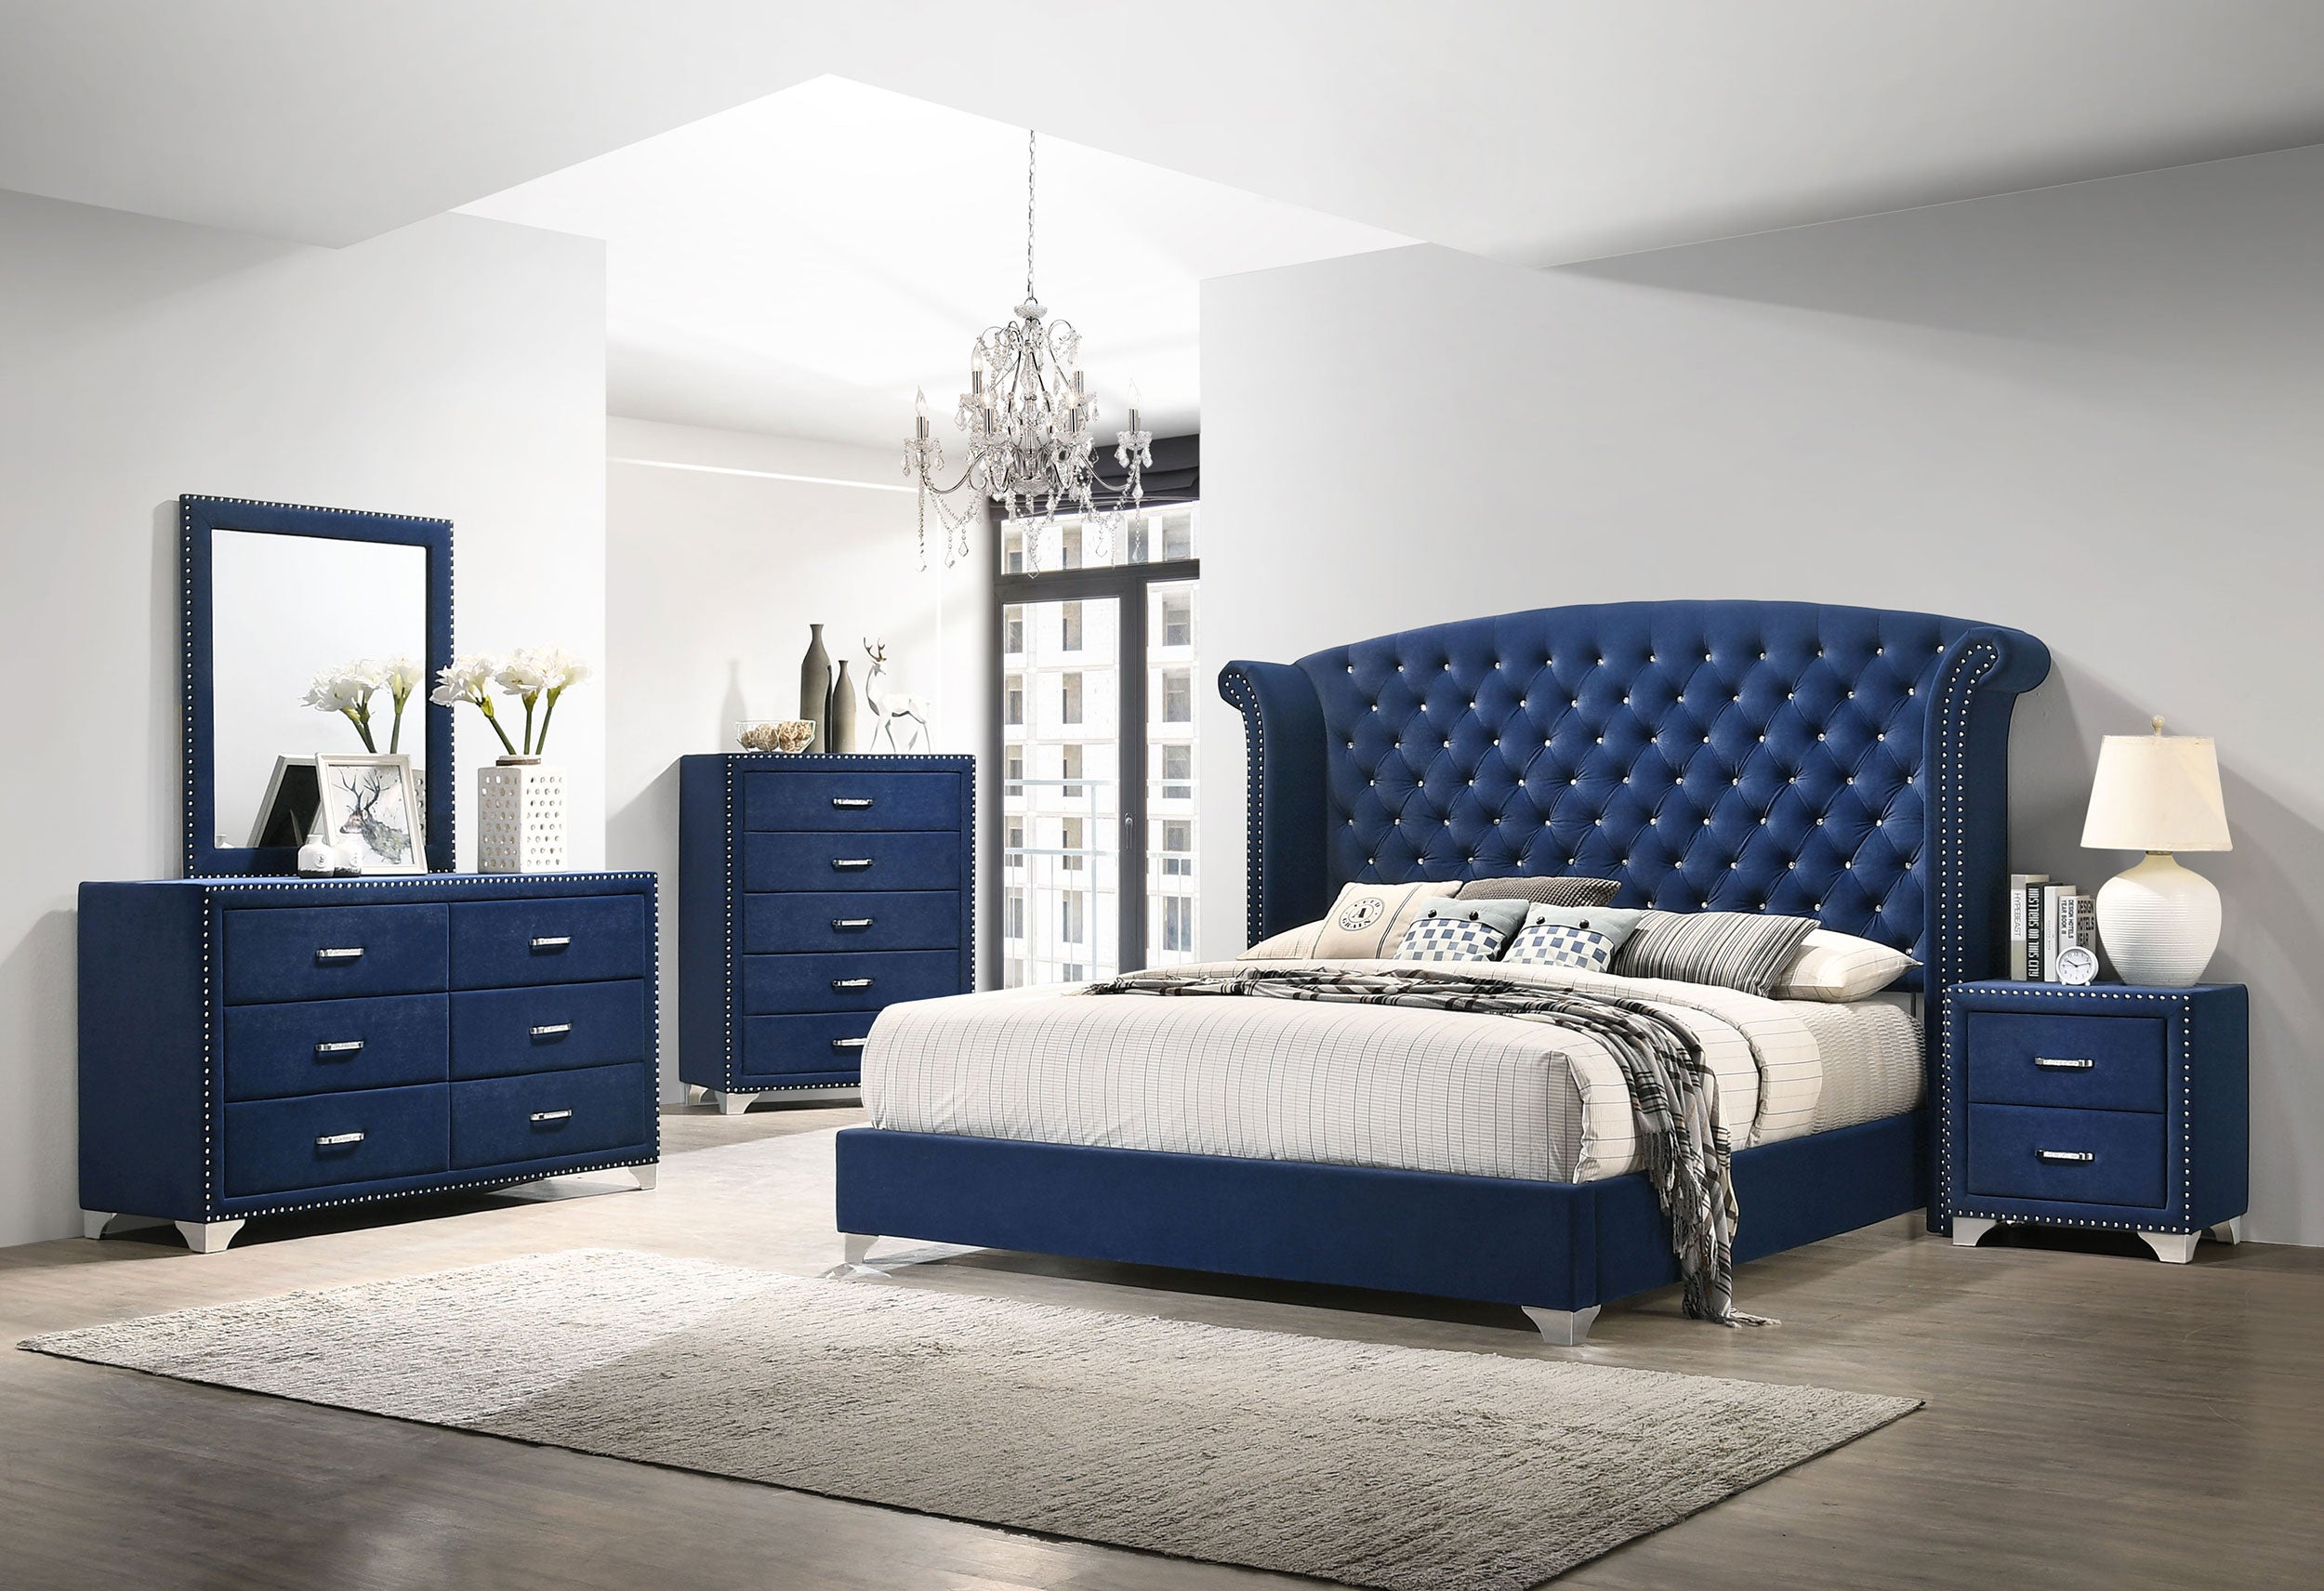 Coaster Melody Tufted Upholstered Bedroom Set Pacific Blue Queen Set of 5